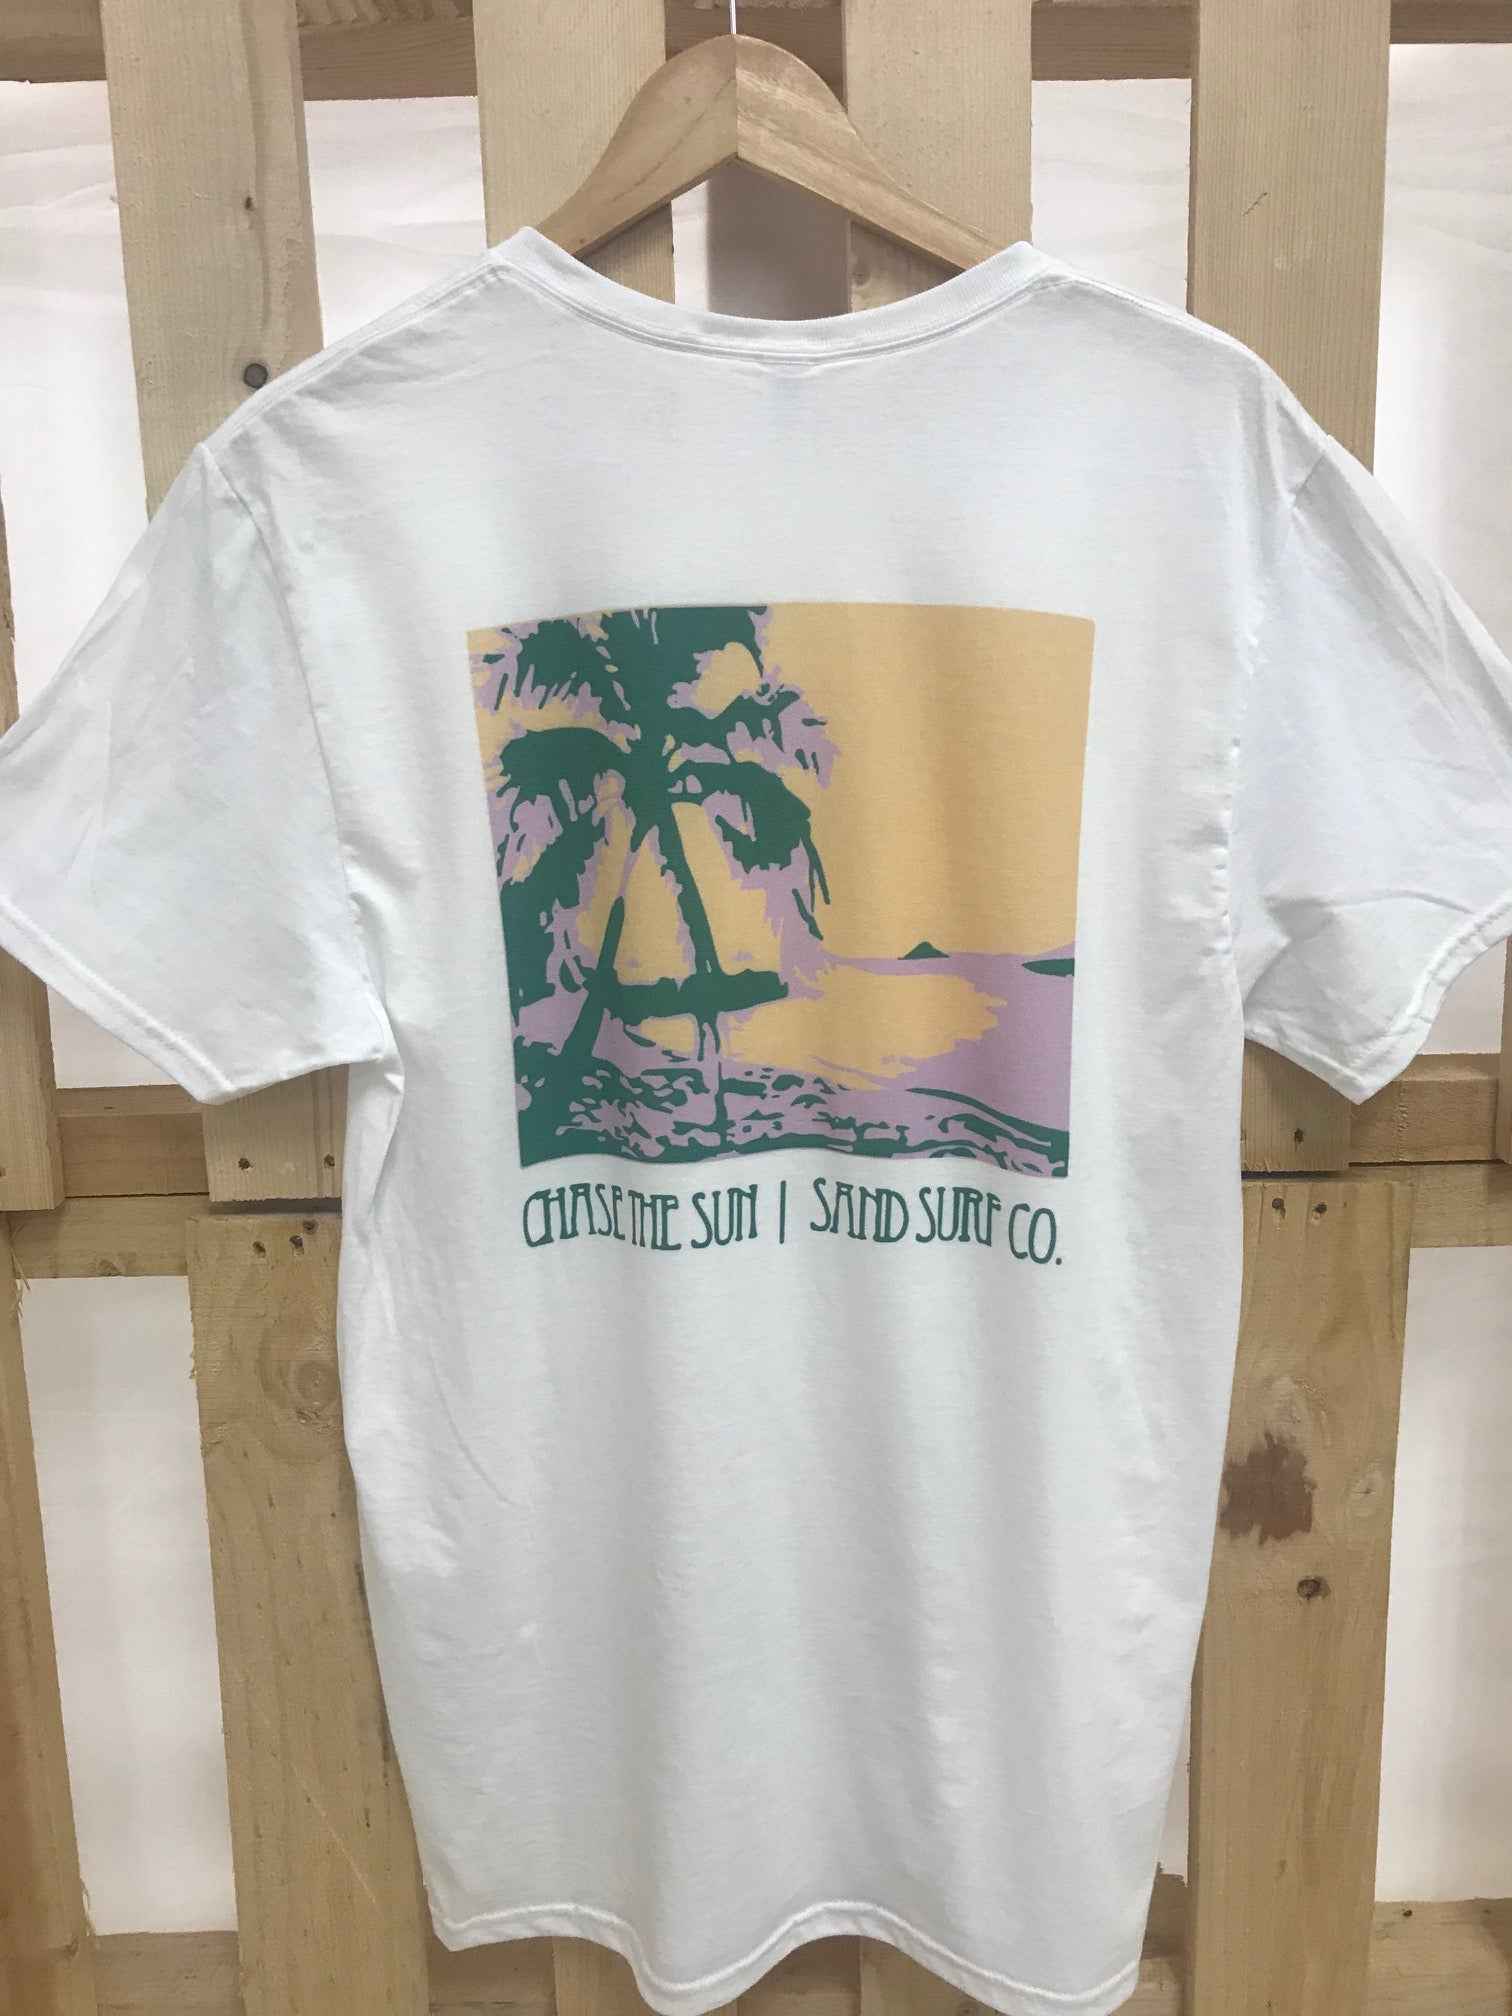 Sand Surf Co. Official Shop Tee X-Large